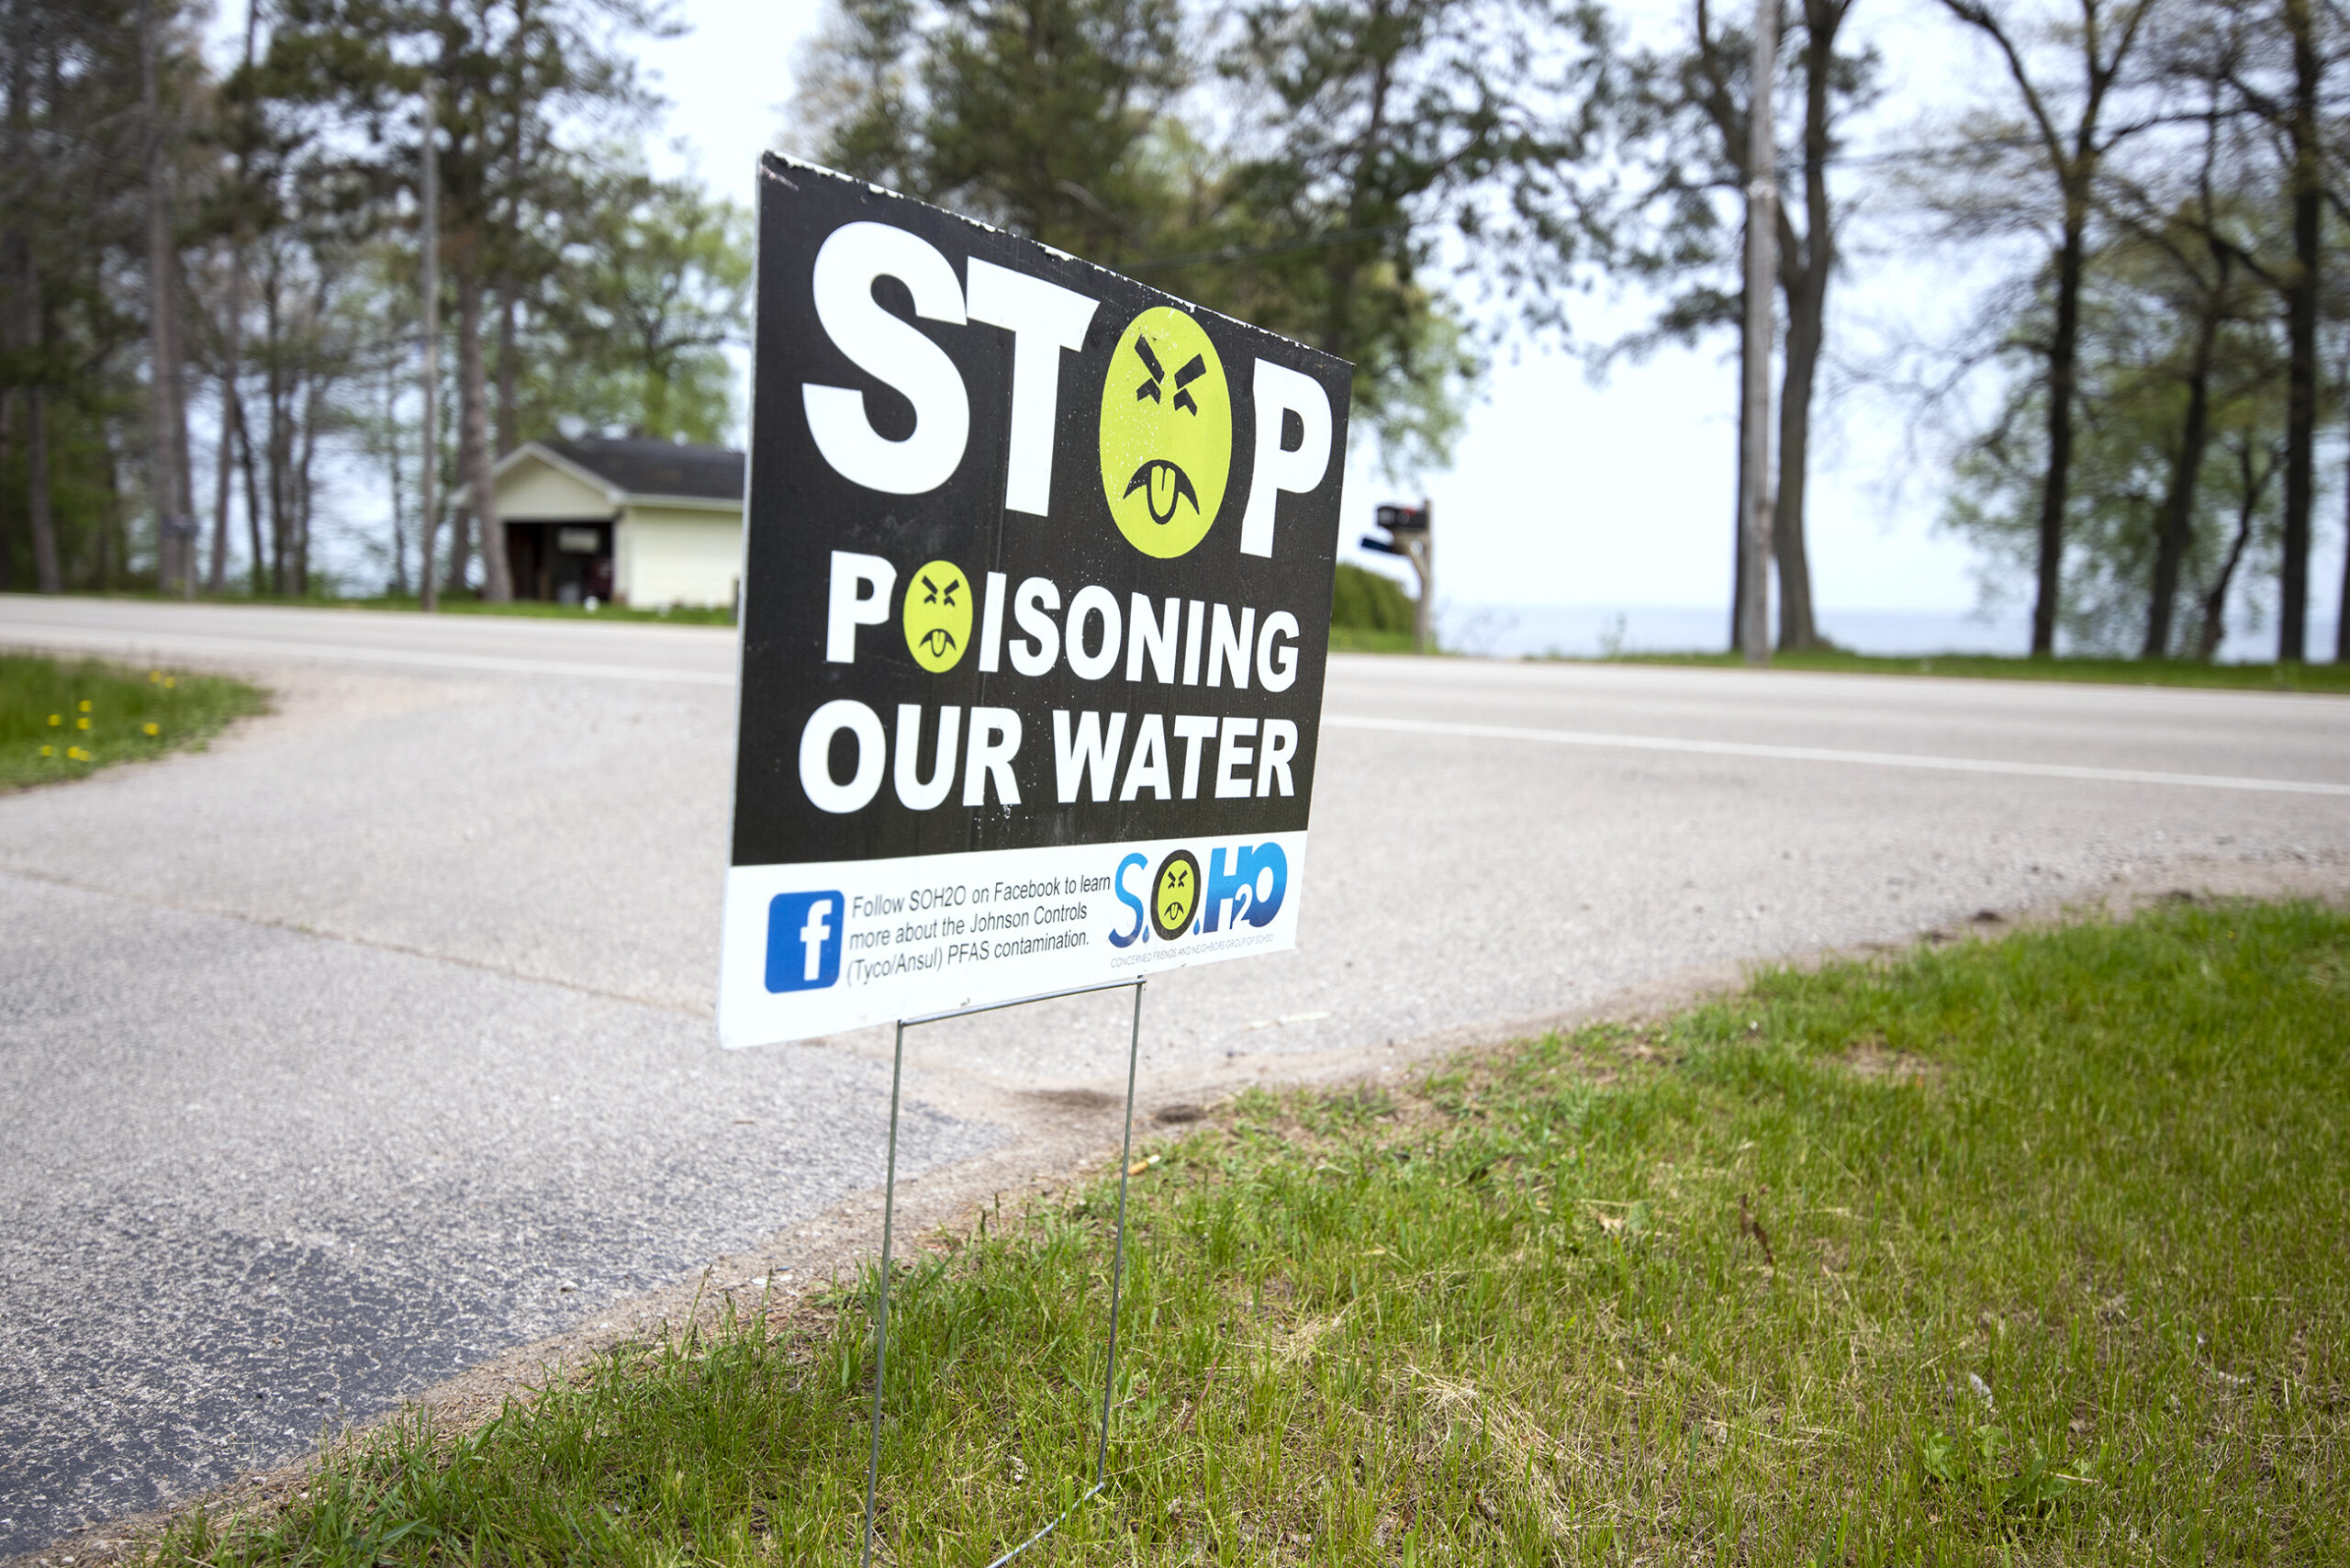 A yard sign says "Stop poisoning our water."